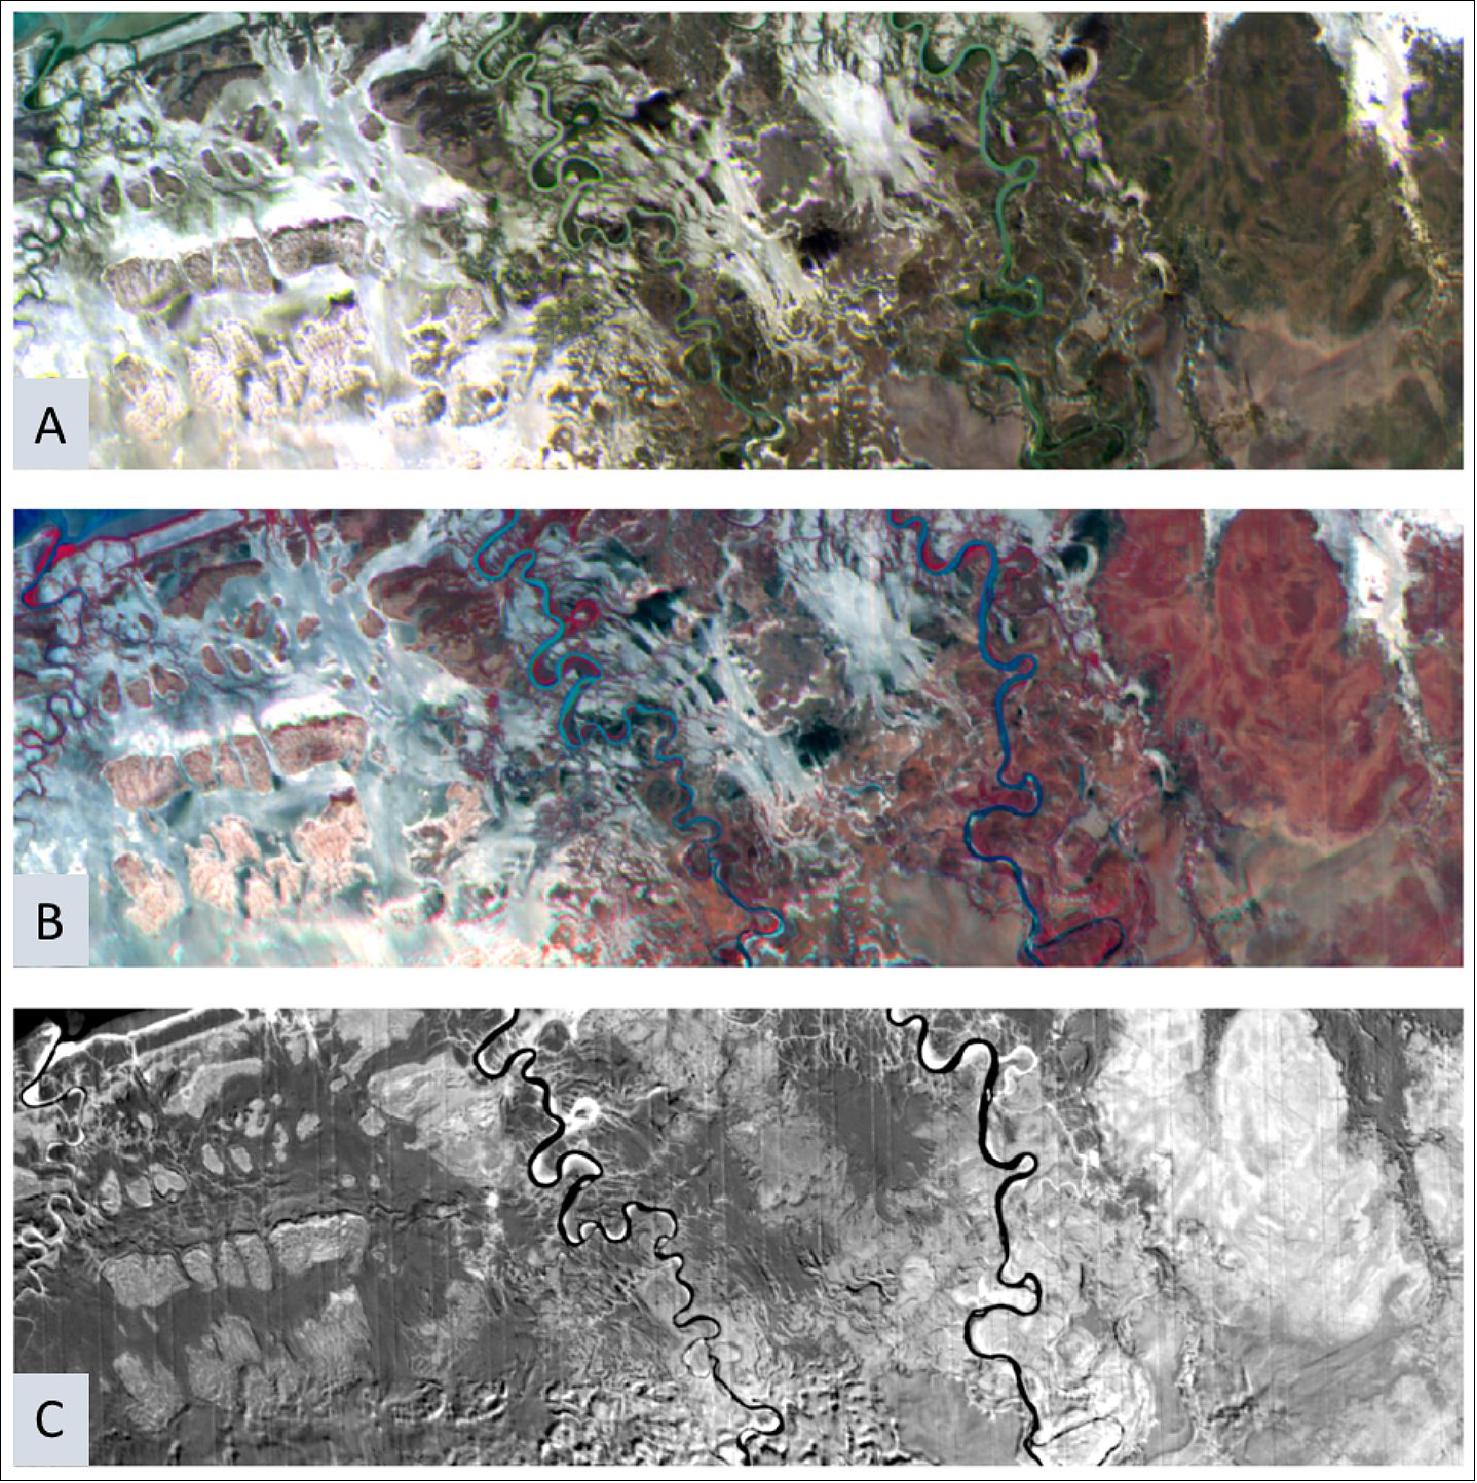 Figure 14: 19 August, 2019, 05:57:41 UT, Georegistered R3 Imagery of the Coast of Northern Australia. A) Red Green Blue imagery, B) Color Infrared, C) NDVI (image credit: Aerospace)